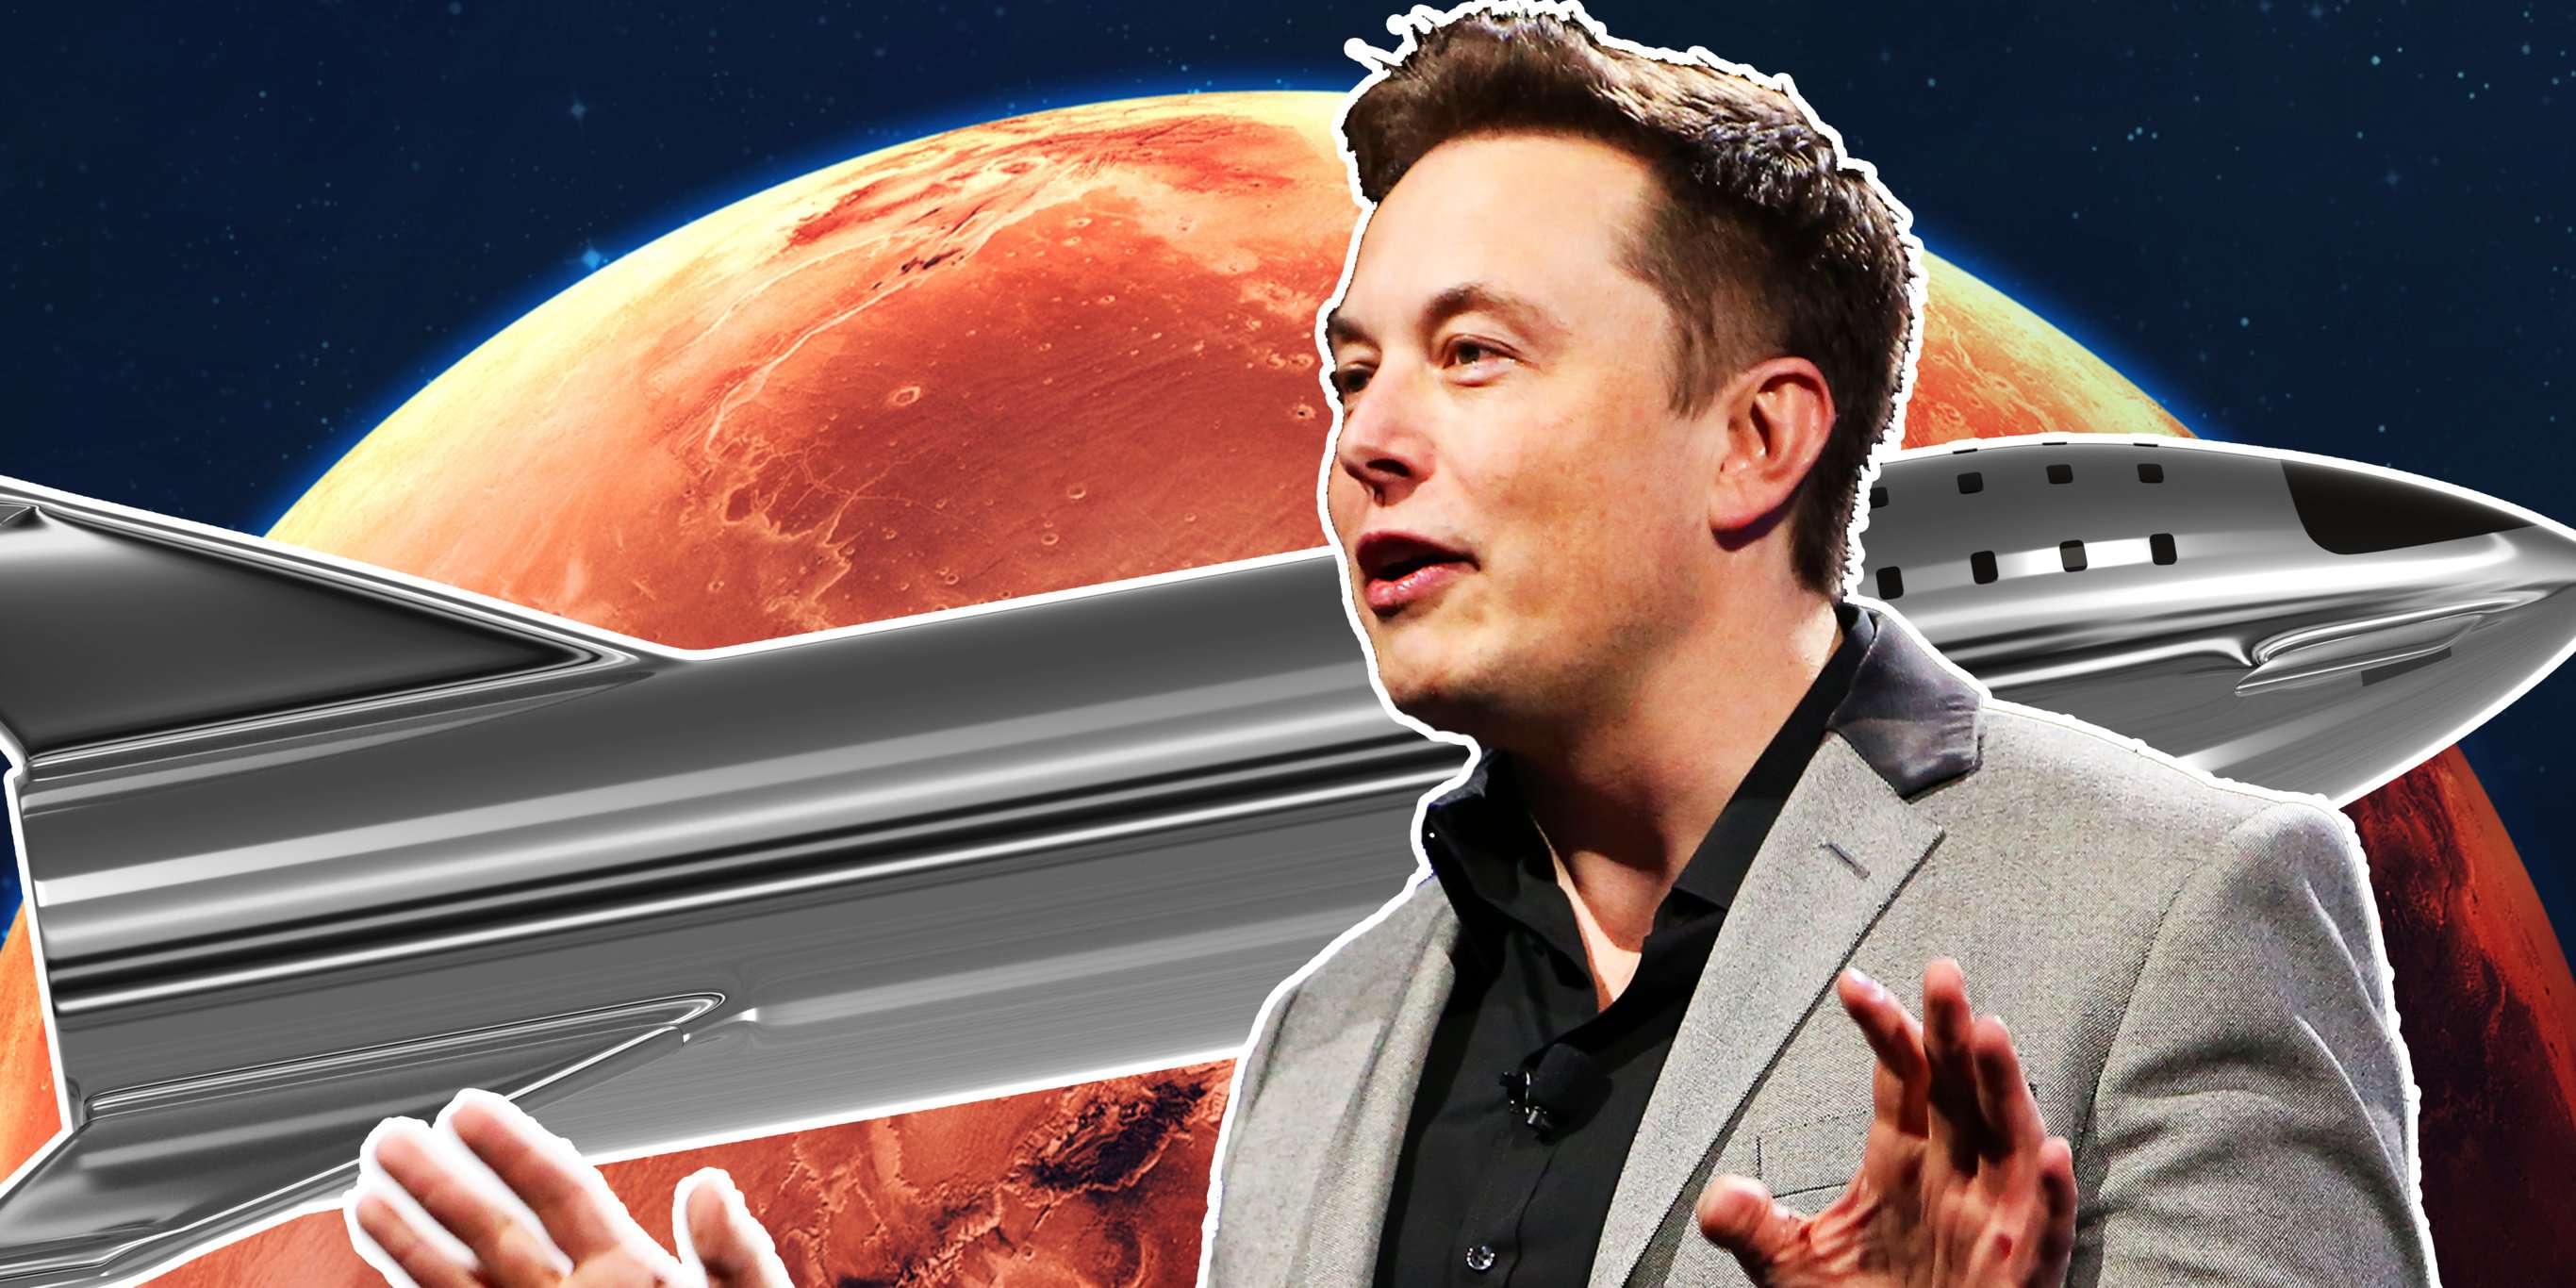 Taboola Ad Example 52334 - Elon Musk's Multibillion-dollar Starship Rocket Could One Day Take People To The Moon And Mars